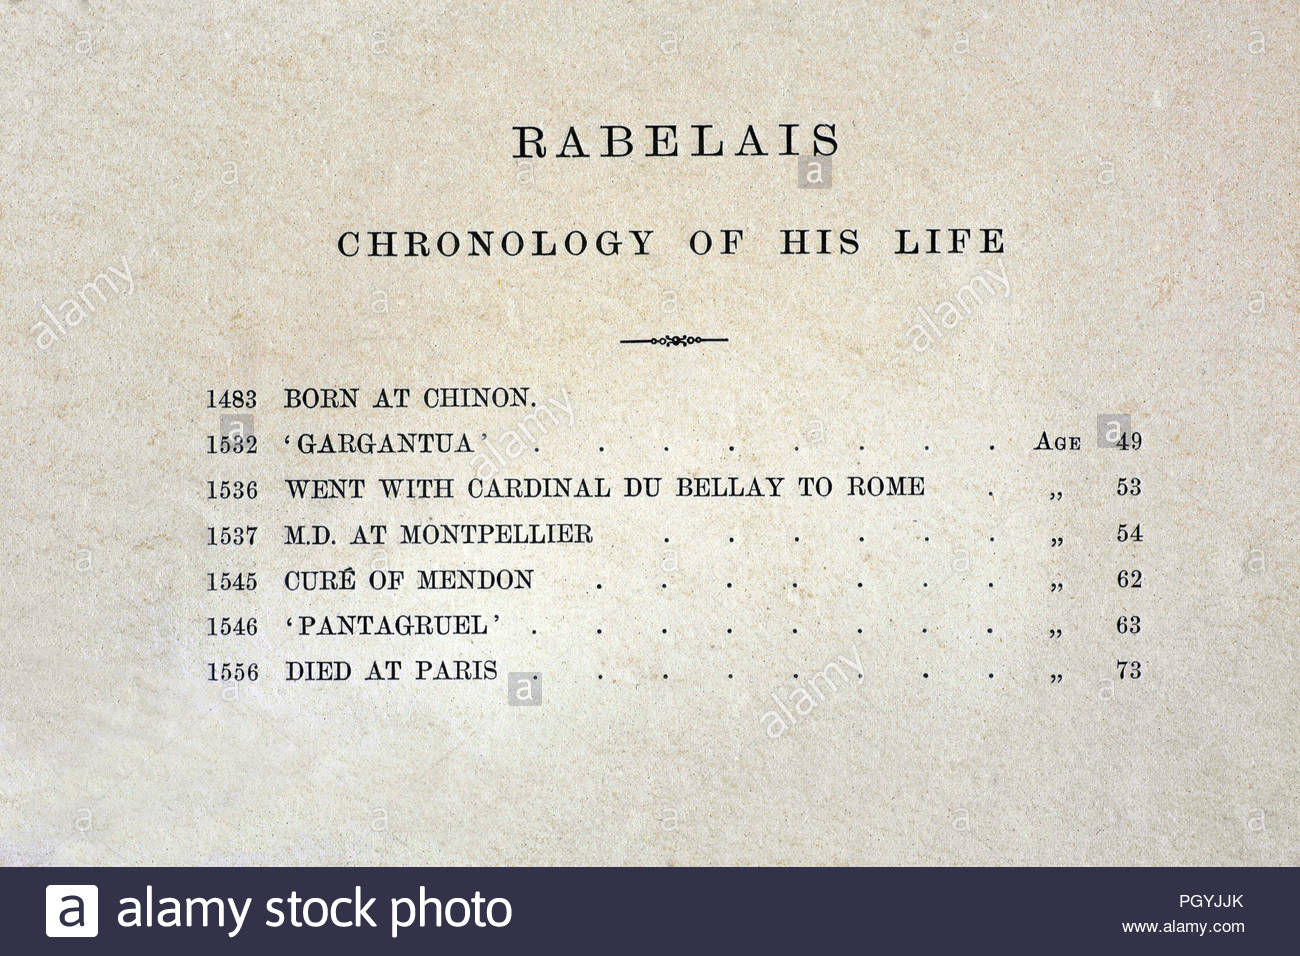 François Rabelais chronology of his life, was a French Renaissance writer, physician, Renaissance humanist, monk and Greek scholar, chronology from antique book 1880 Stock Photo